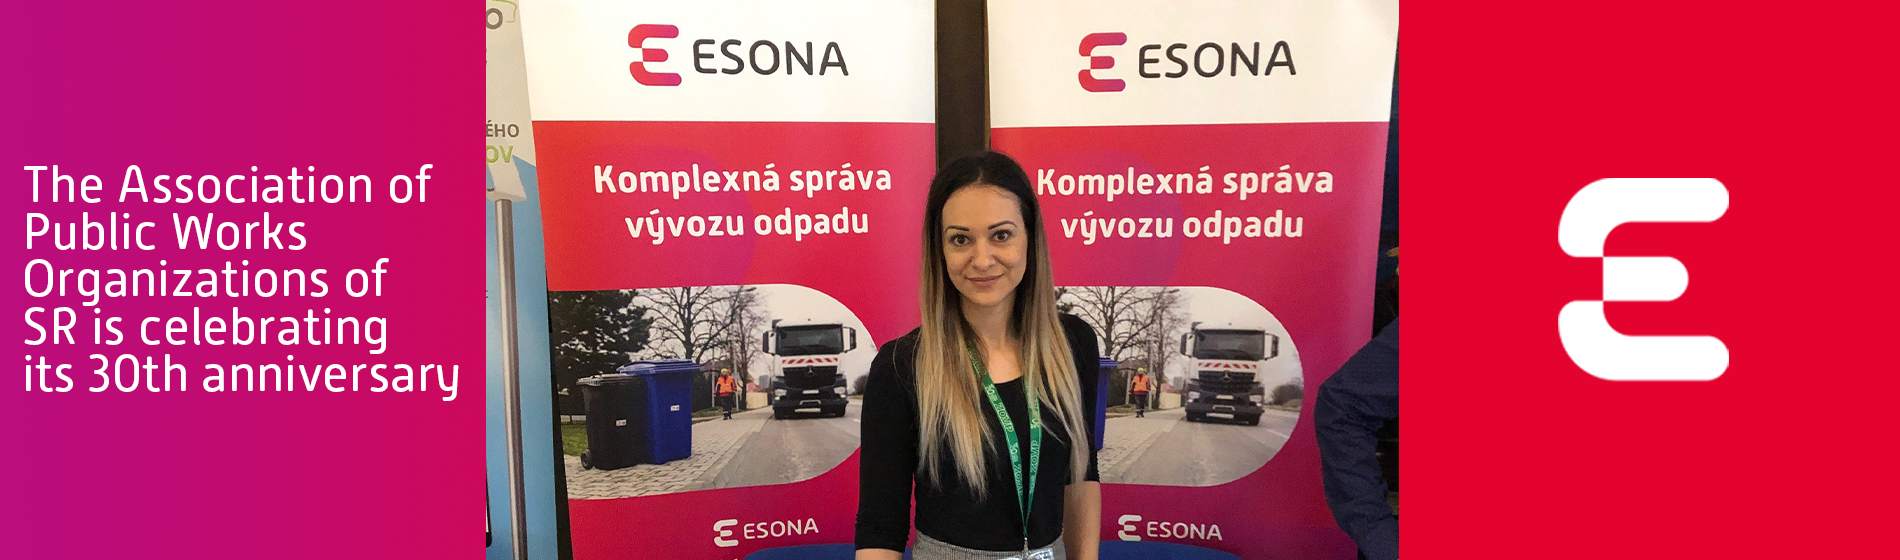 ESONA at the annual meeting of the Association of Public Works Organizations of SR